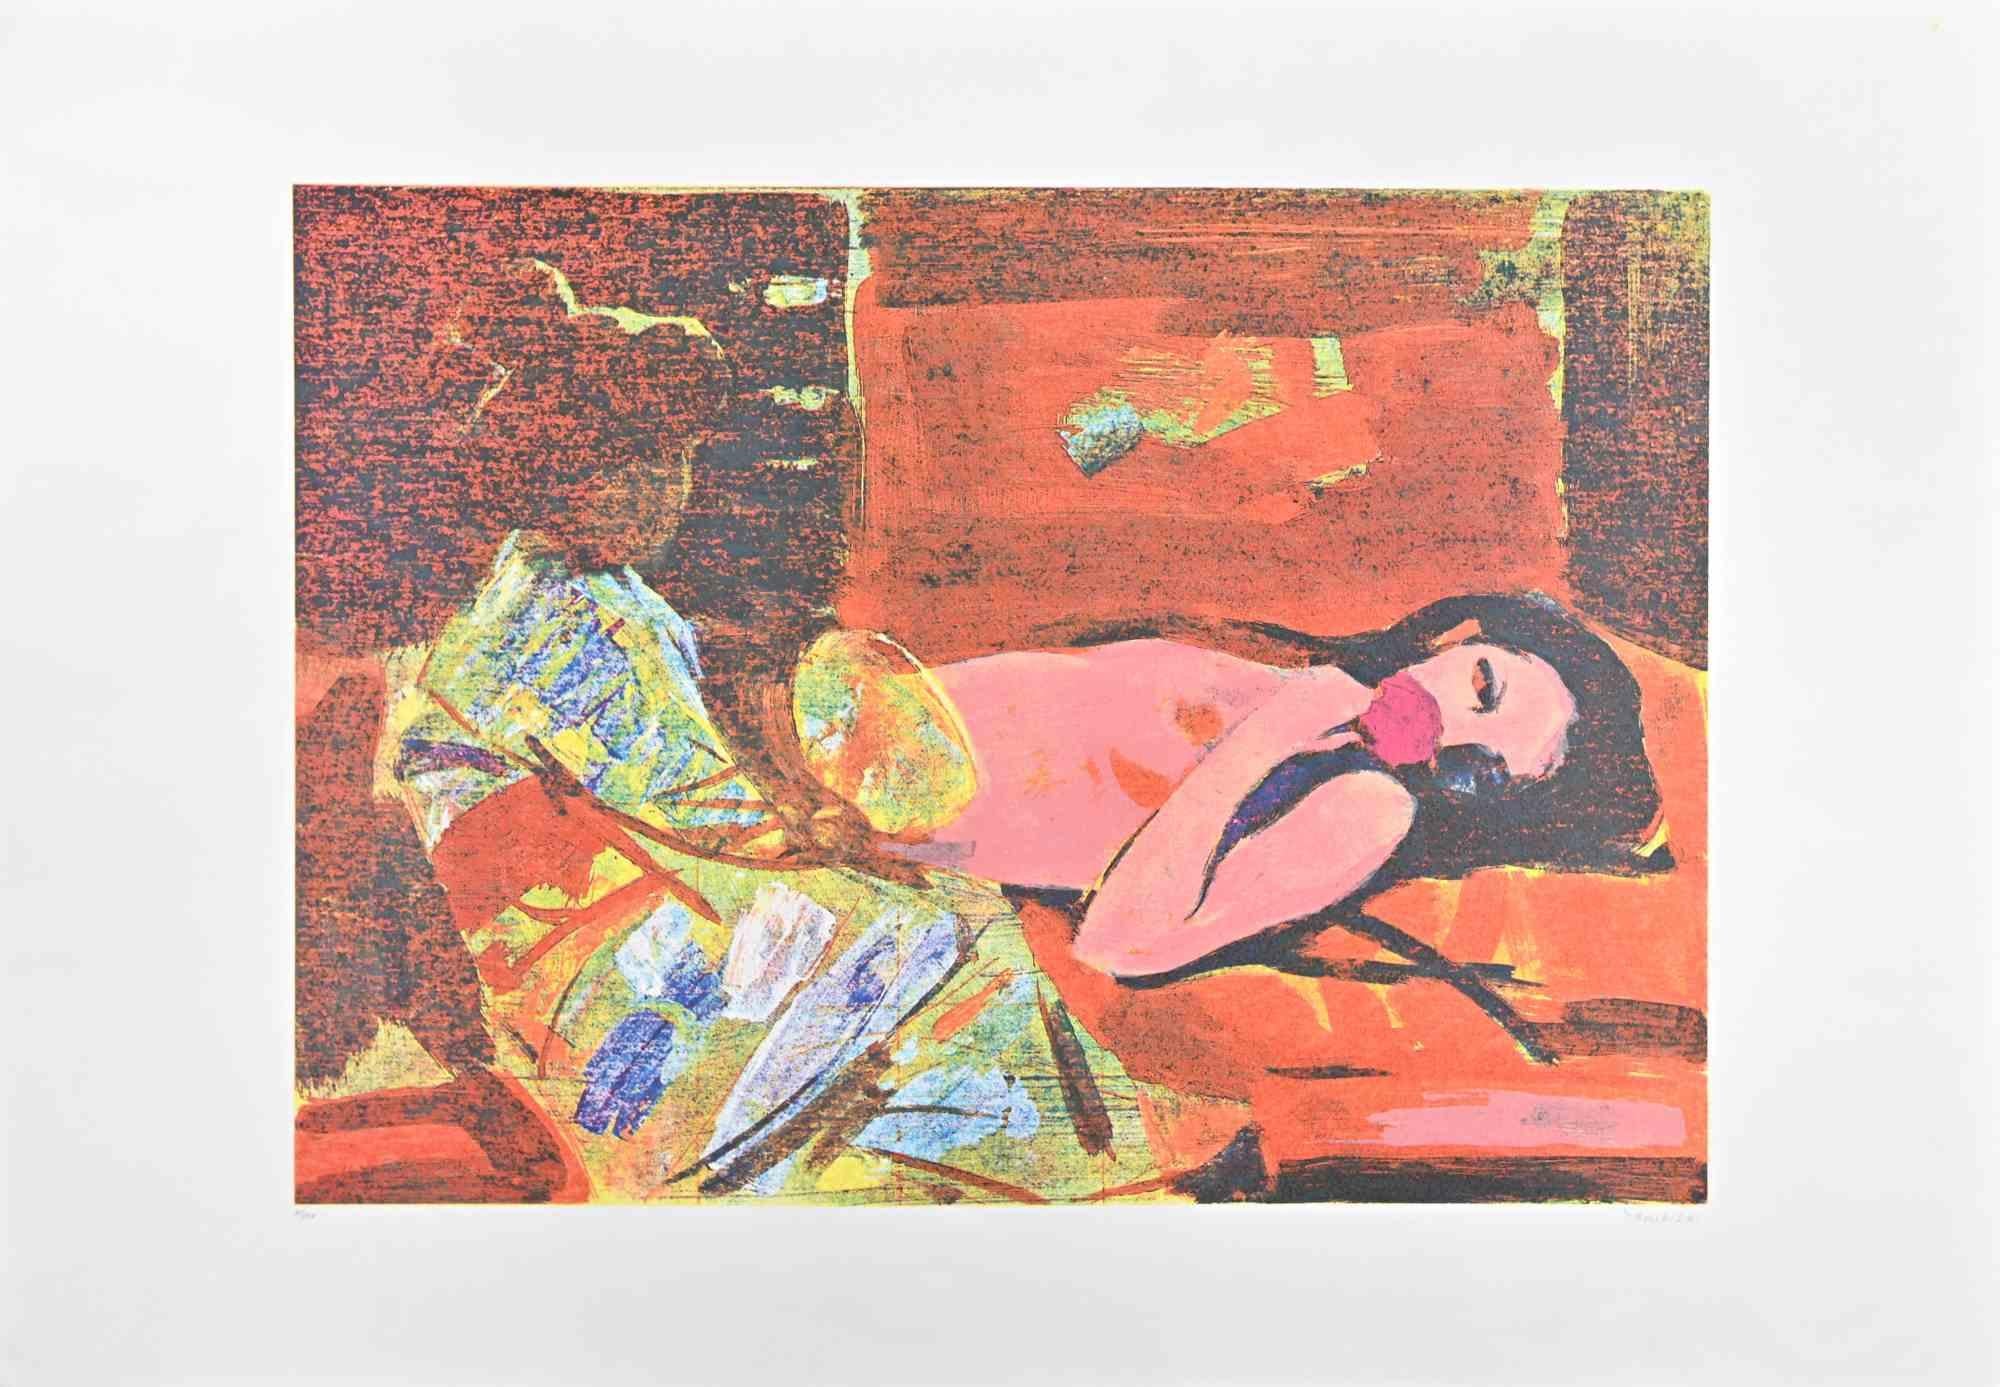 Siesta  is a print realized by the Italian artist Giuseppe Tampieri in 1988.

Original mixed colored screen print.

Hand-signed  by the artist on the lower left. Numbered on the lower right. Edition 41/150.

Very good conditions, except for some